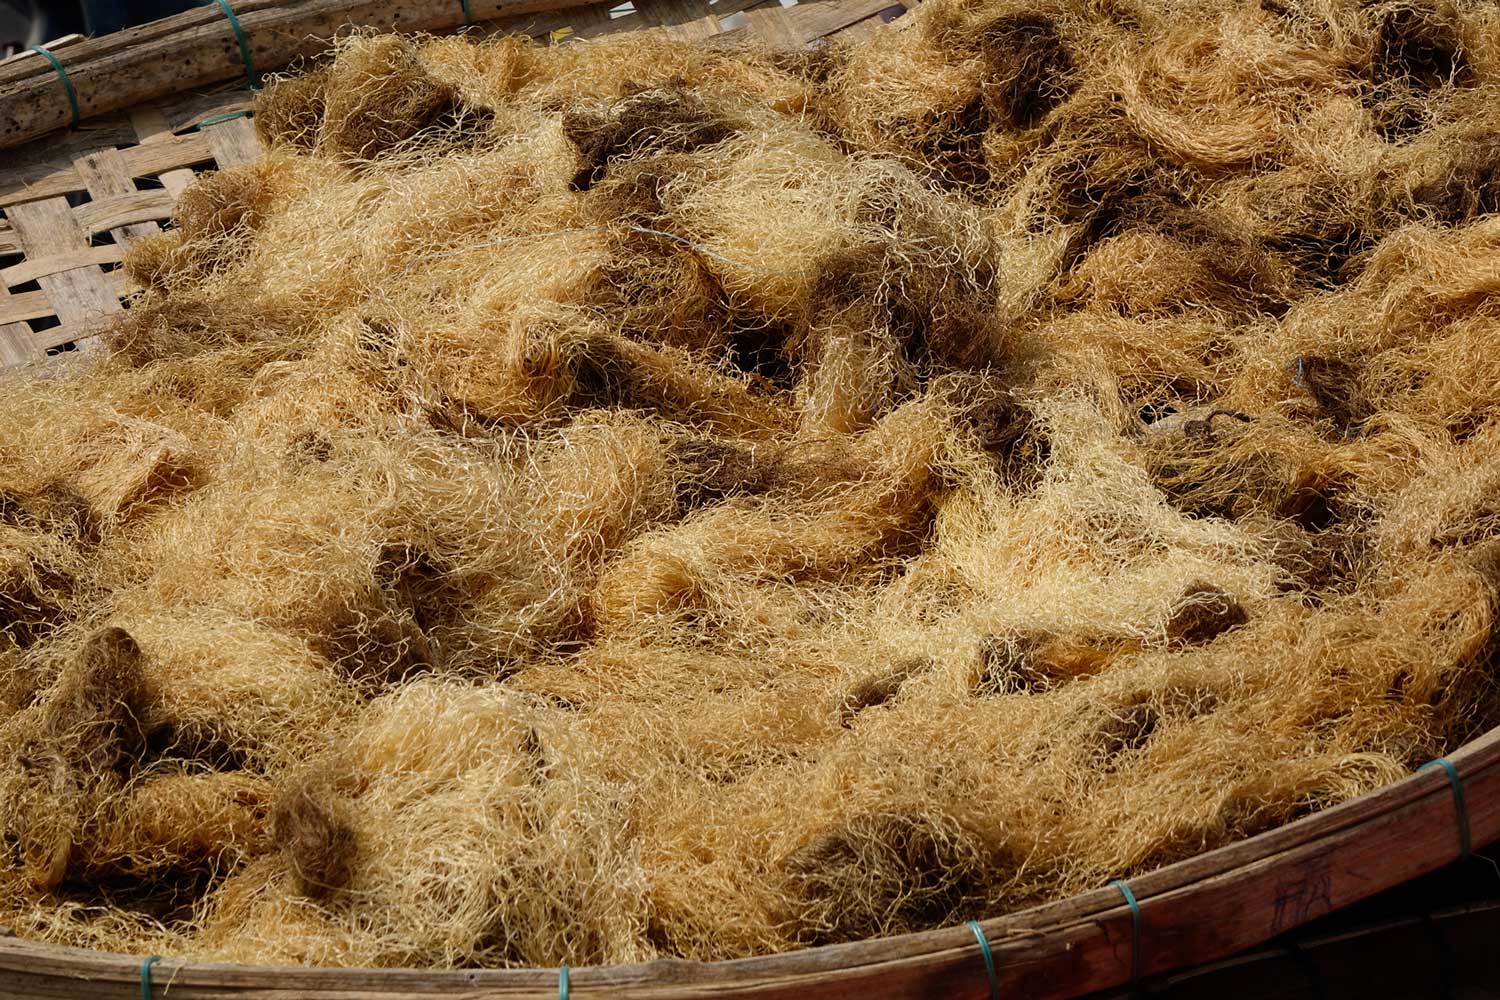 Sun dried rice noodles in Hoi An